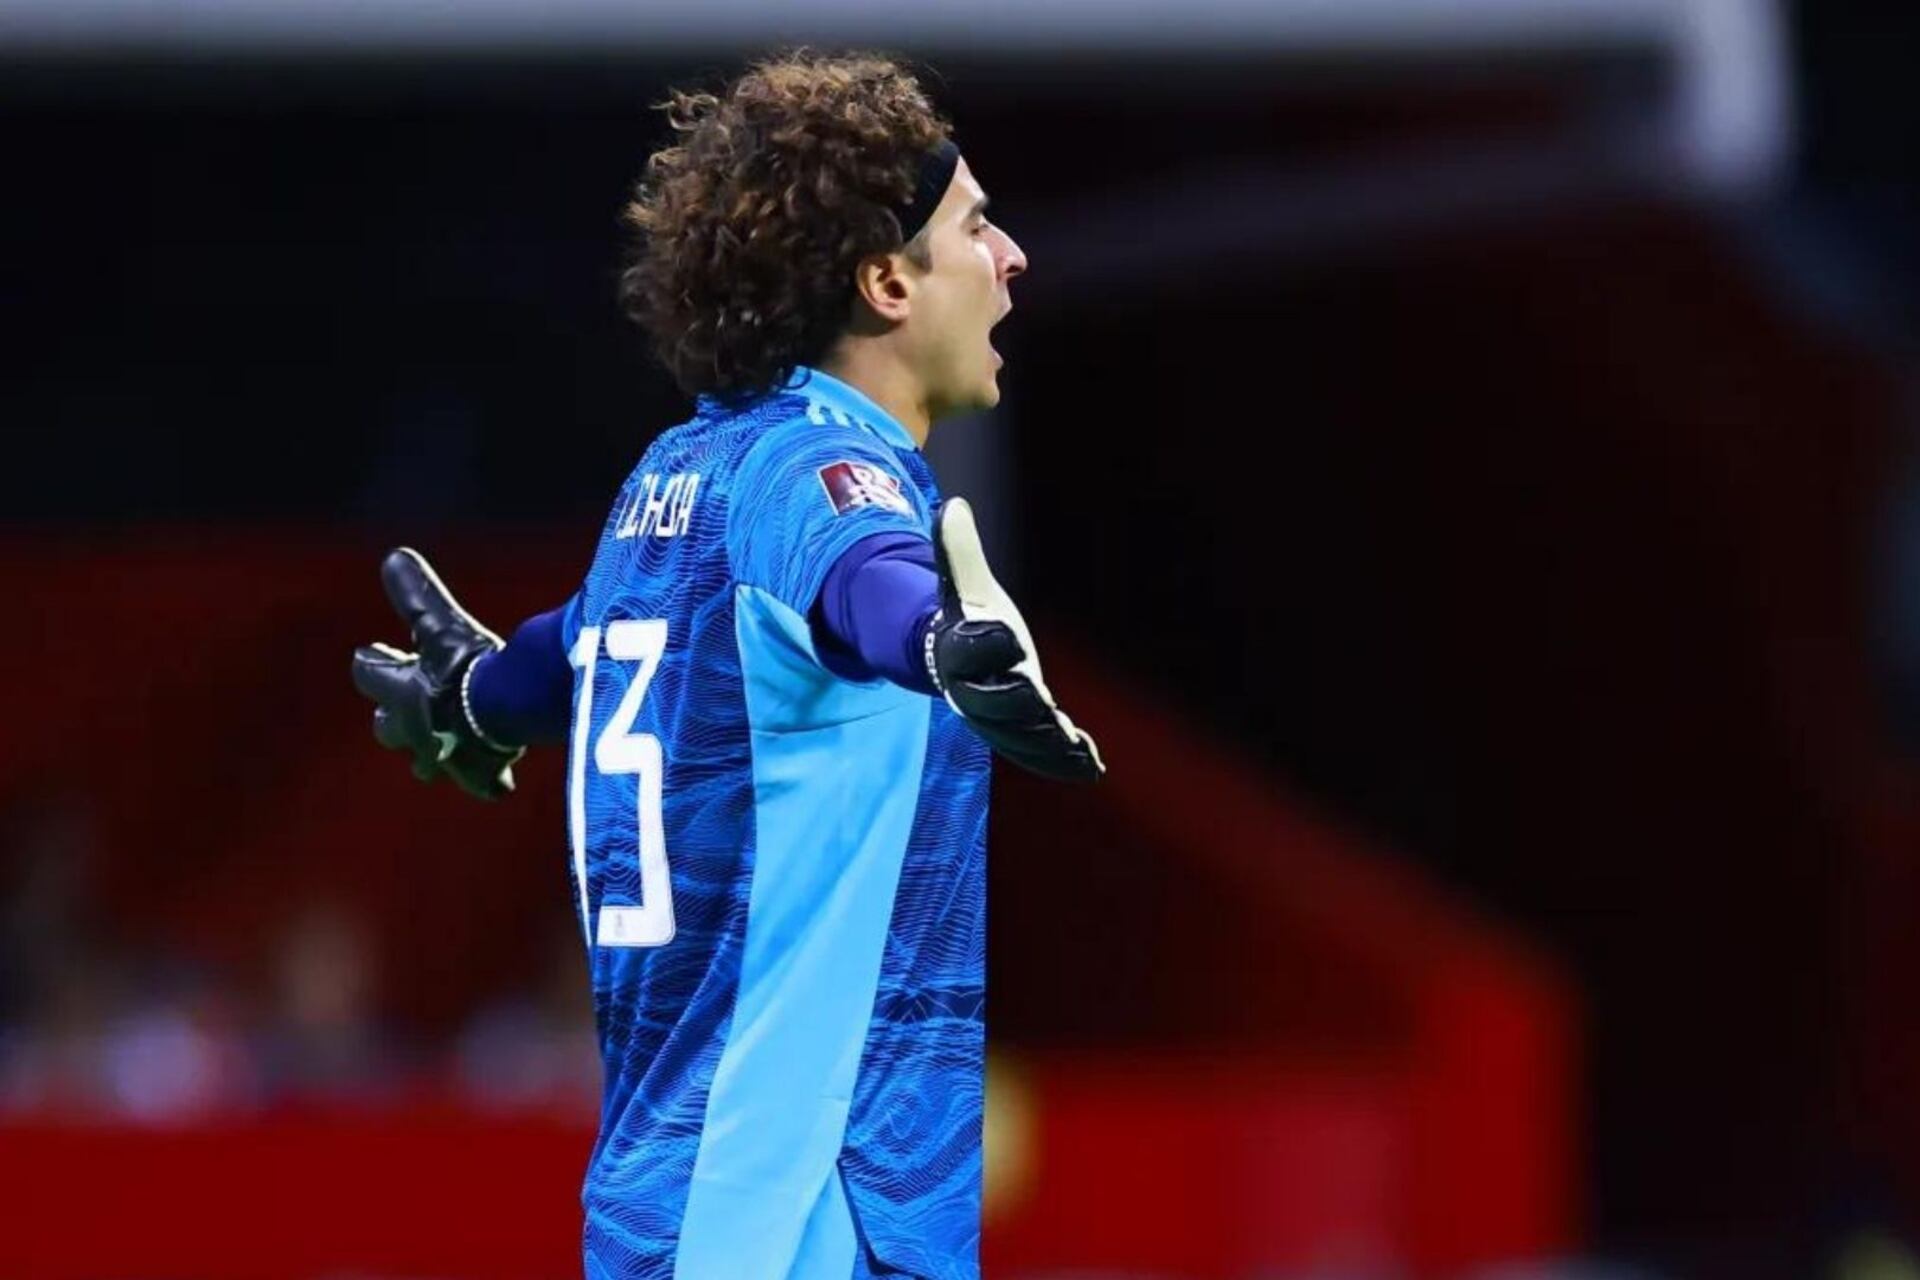 The reason why these two players don’t play with Club América and it’s Guillermo Ochoa’s fault